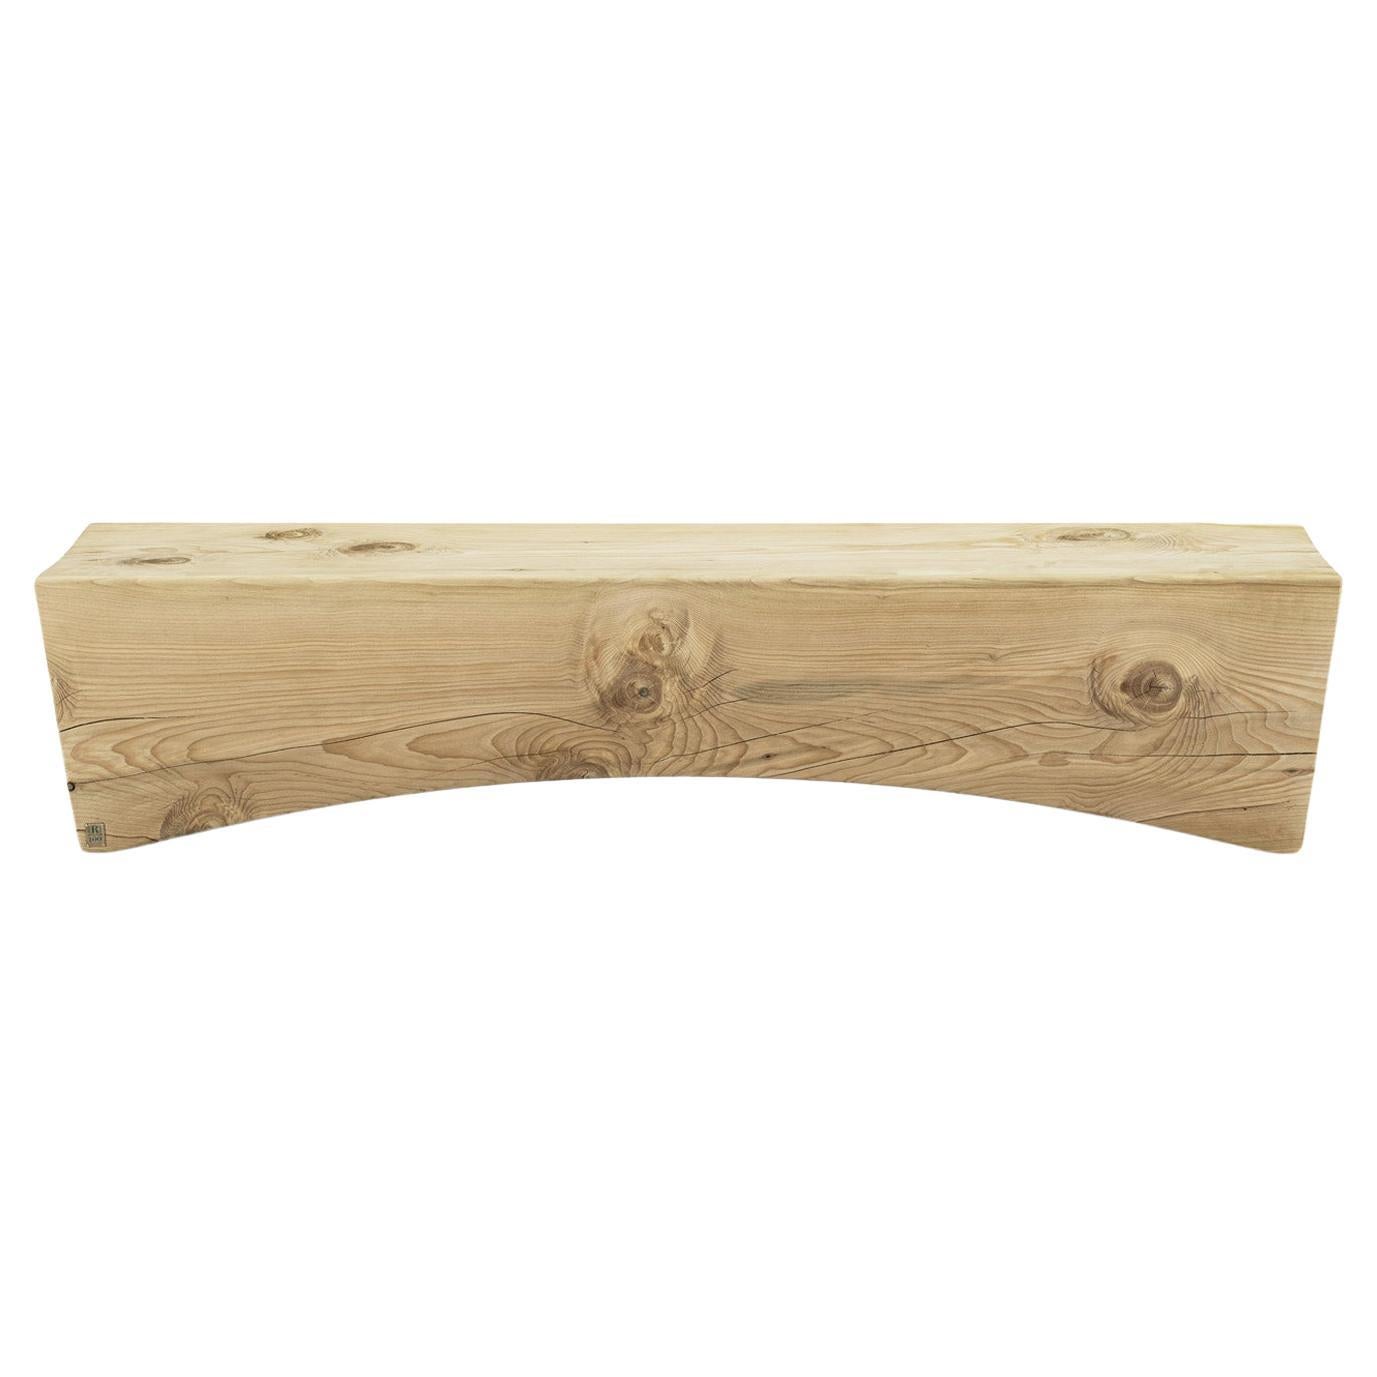 Pontevecchio Solid Wood Bench, Designed by Vegni Design, Made in Italy 